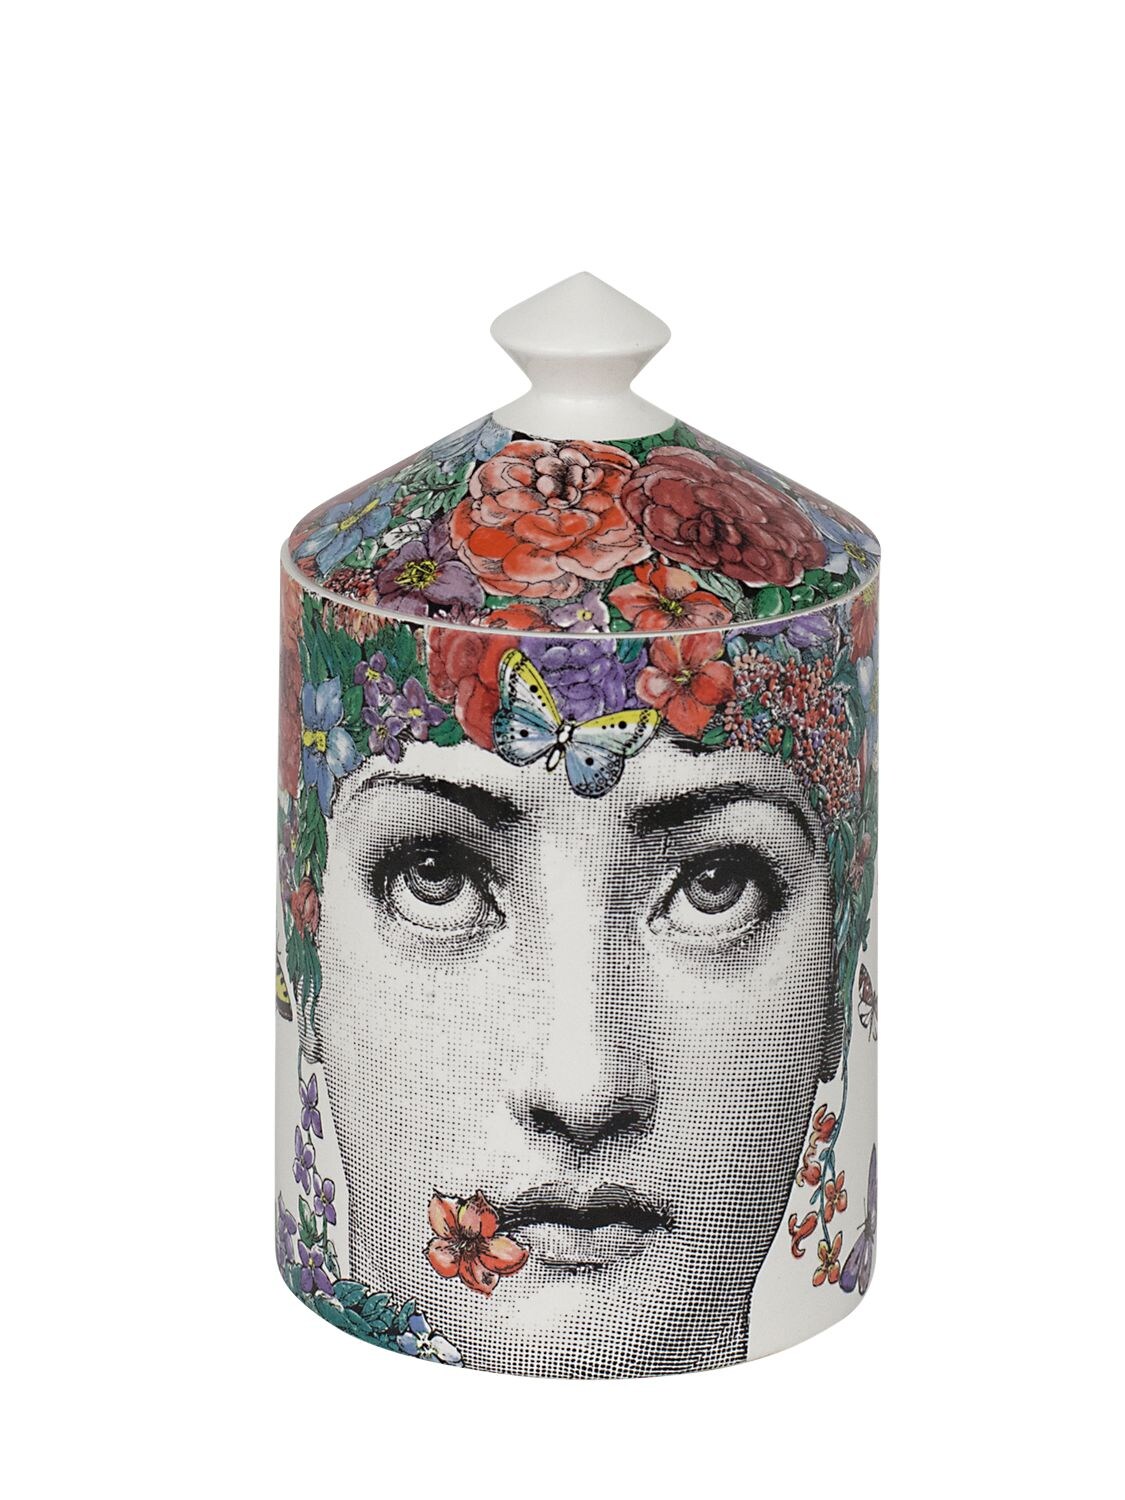 FORNASETTI FIOR DI LINA SCENTED CANDLE WITH LID,69IWUZ003-TVVMVELDT0XPUG2